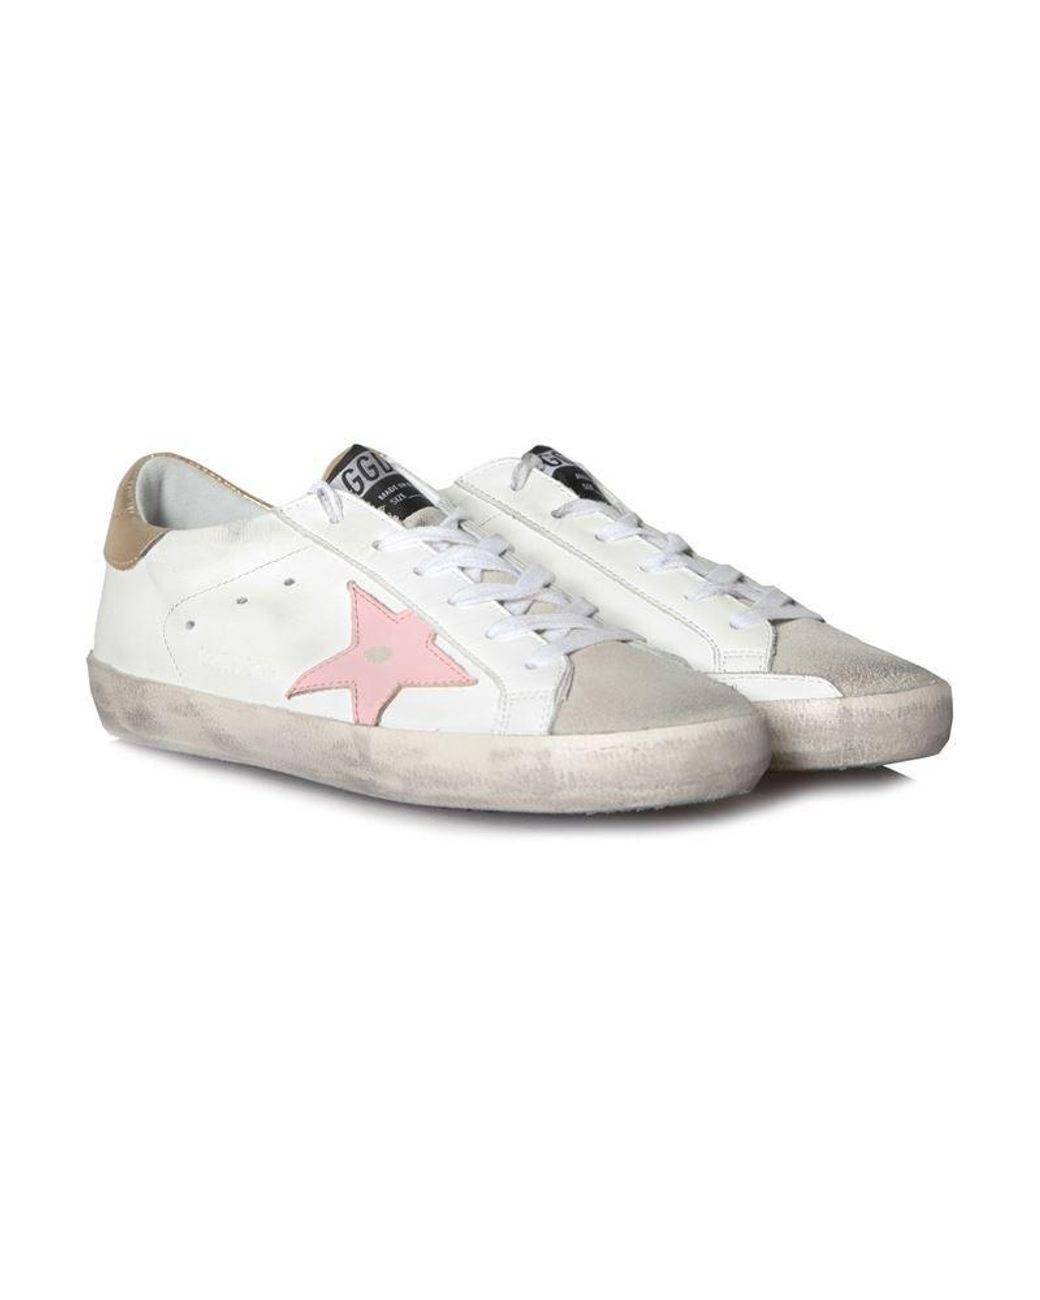 Golden Goose Sneakers Superstar White Gold Pink Star | Lyst